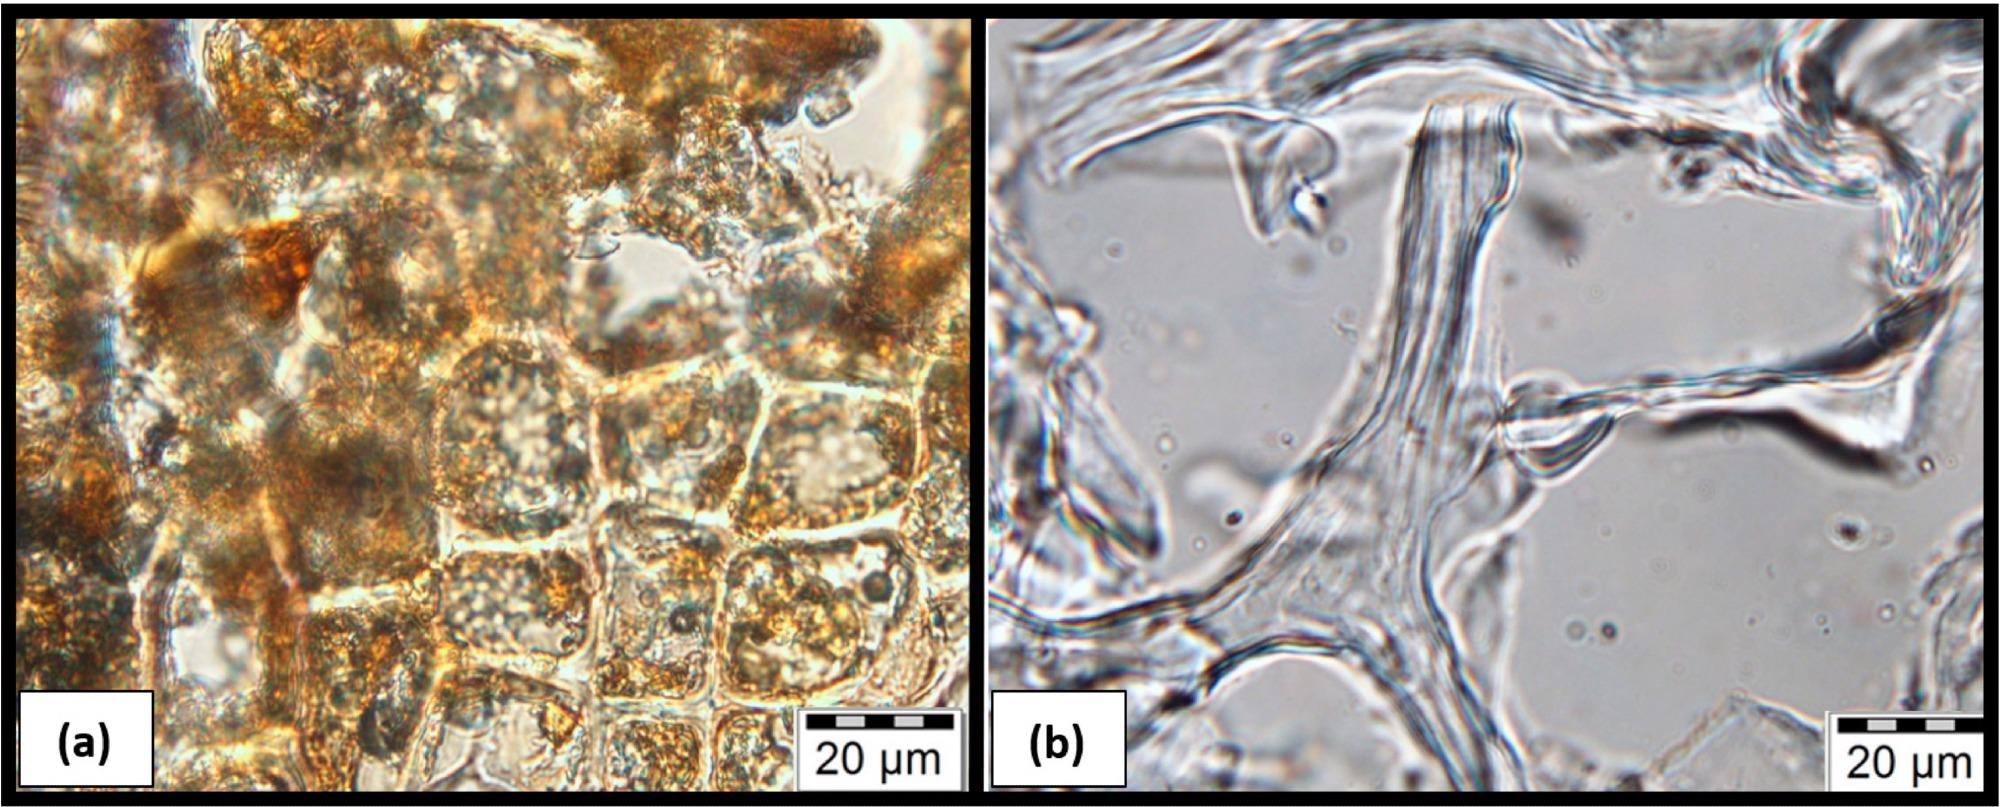 Microscopic photographs of microtome slices of (a) SSCC-40 showing dark coffee particles embedded in clear starch gel. (b) SSCC-100 displays clear starch gel filaments and large voids (vacuoles).